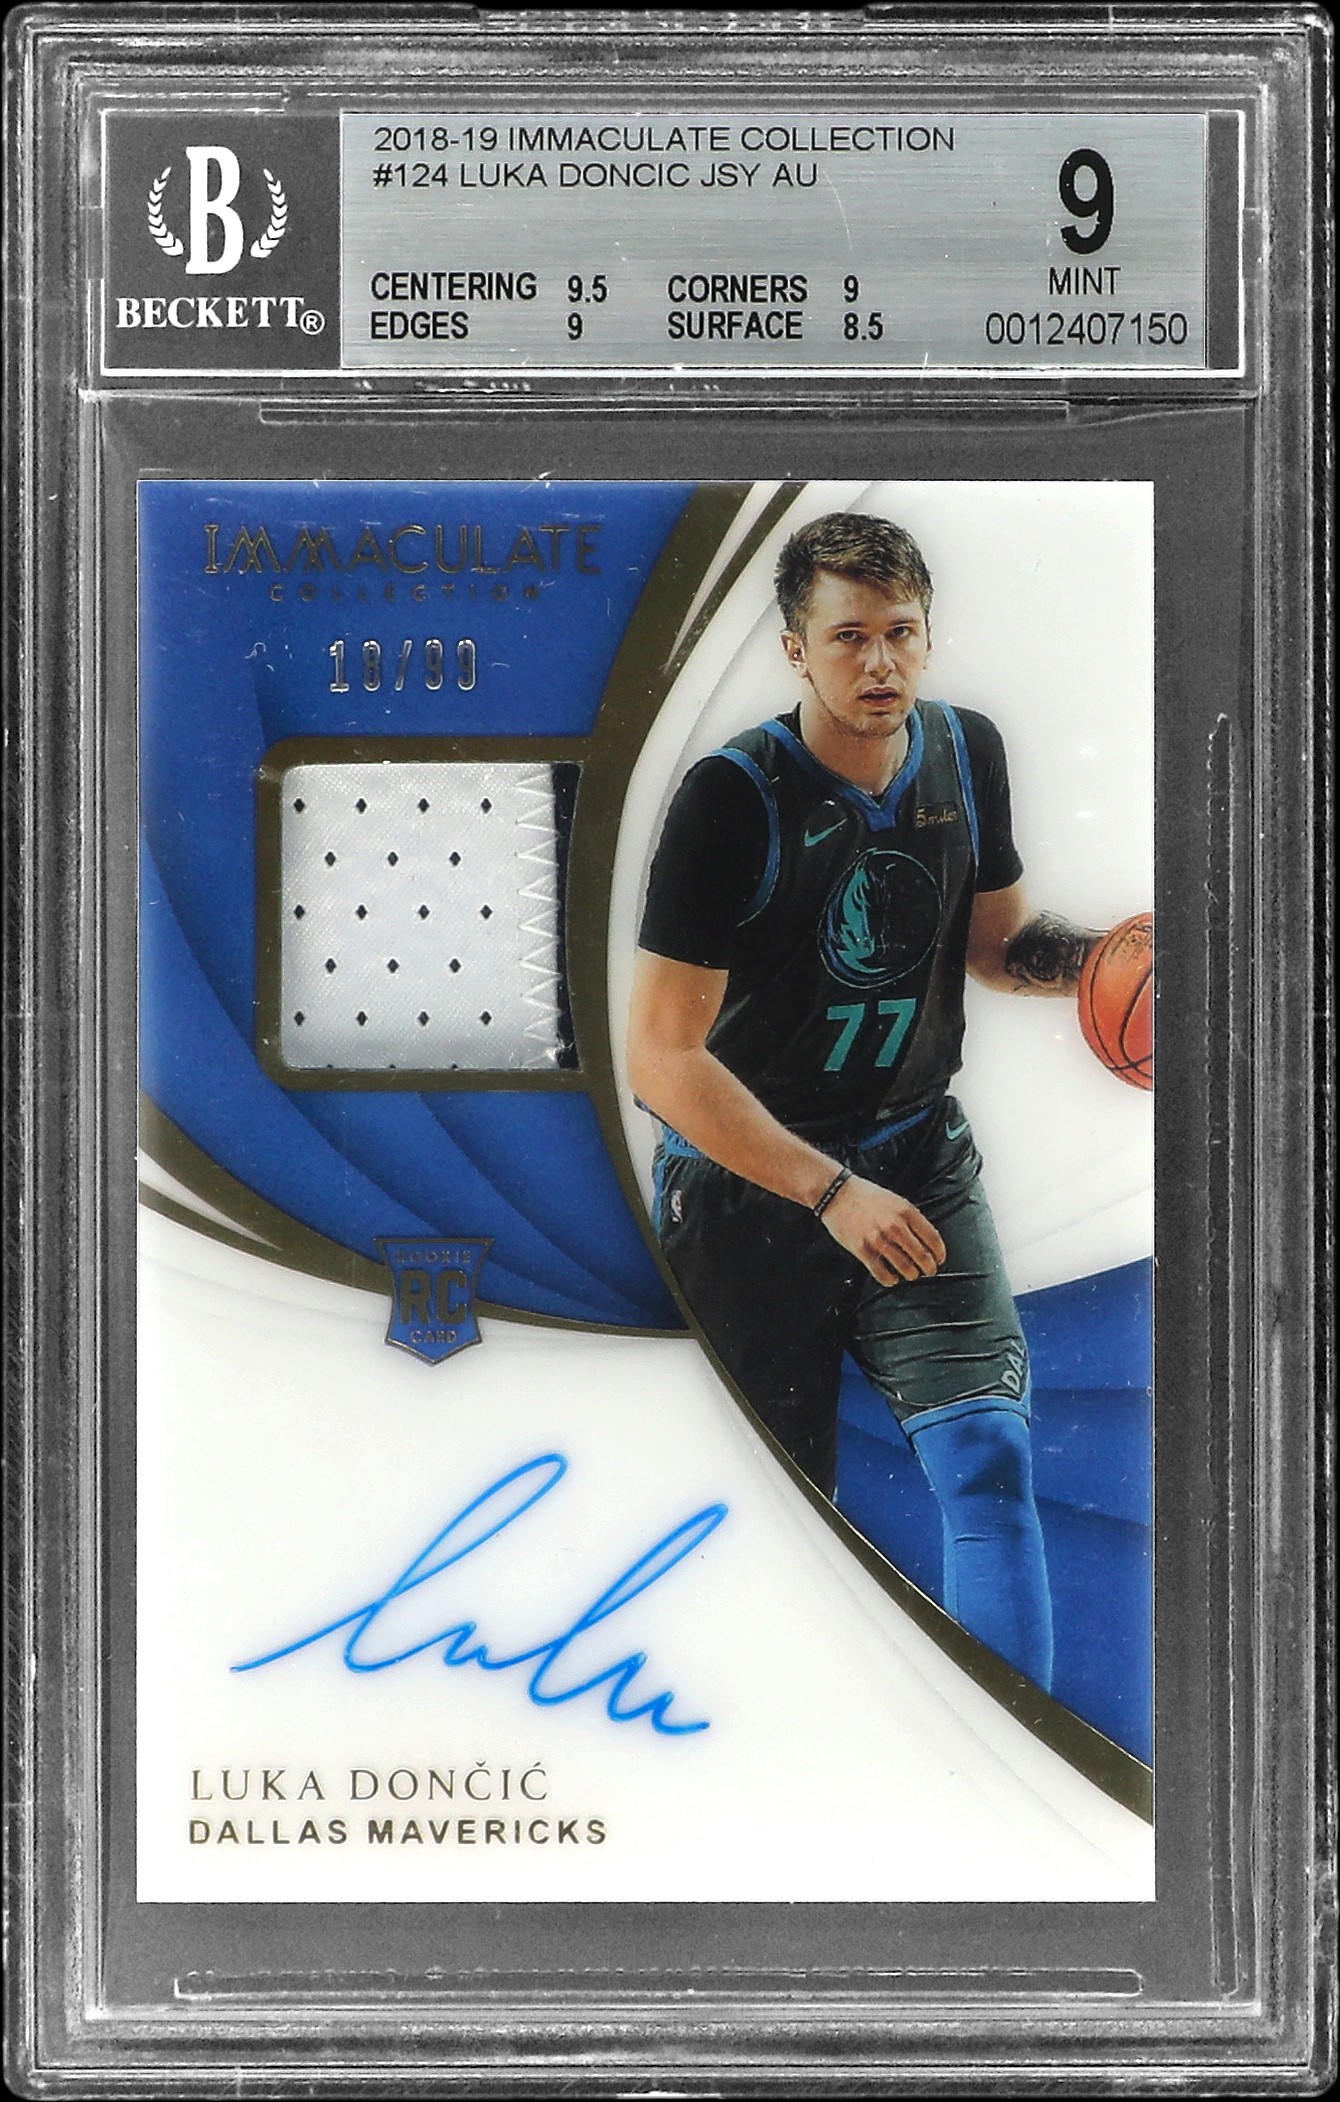 2018-19 Panini Immaculate Collection Rookie Patch Autograph (RPA) #124 Luka Doncic Signed Patch Rookie Card (#18/99) - BGS MINT 9, Beckett 10
